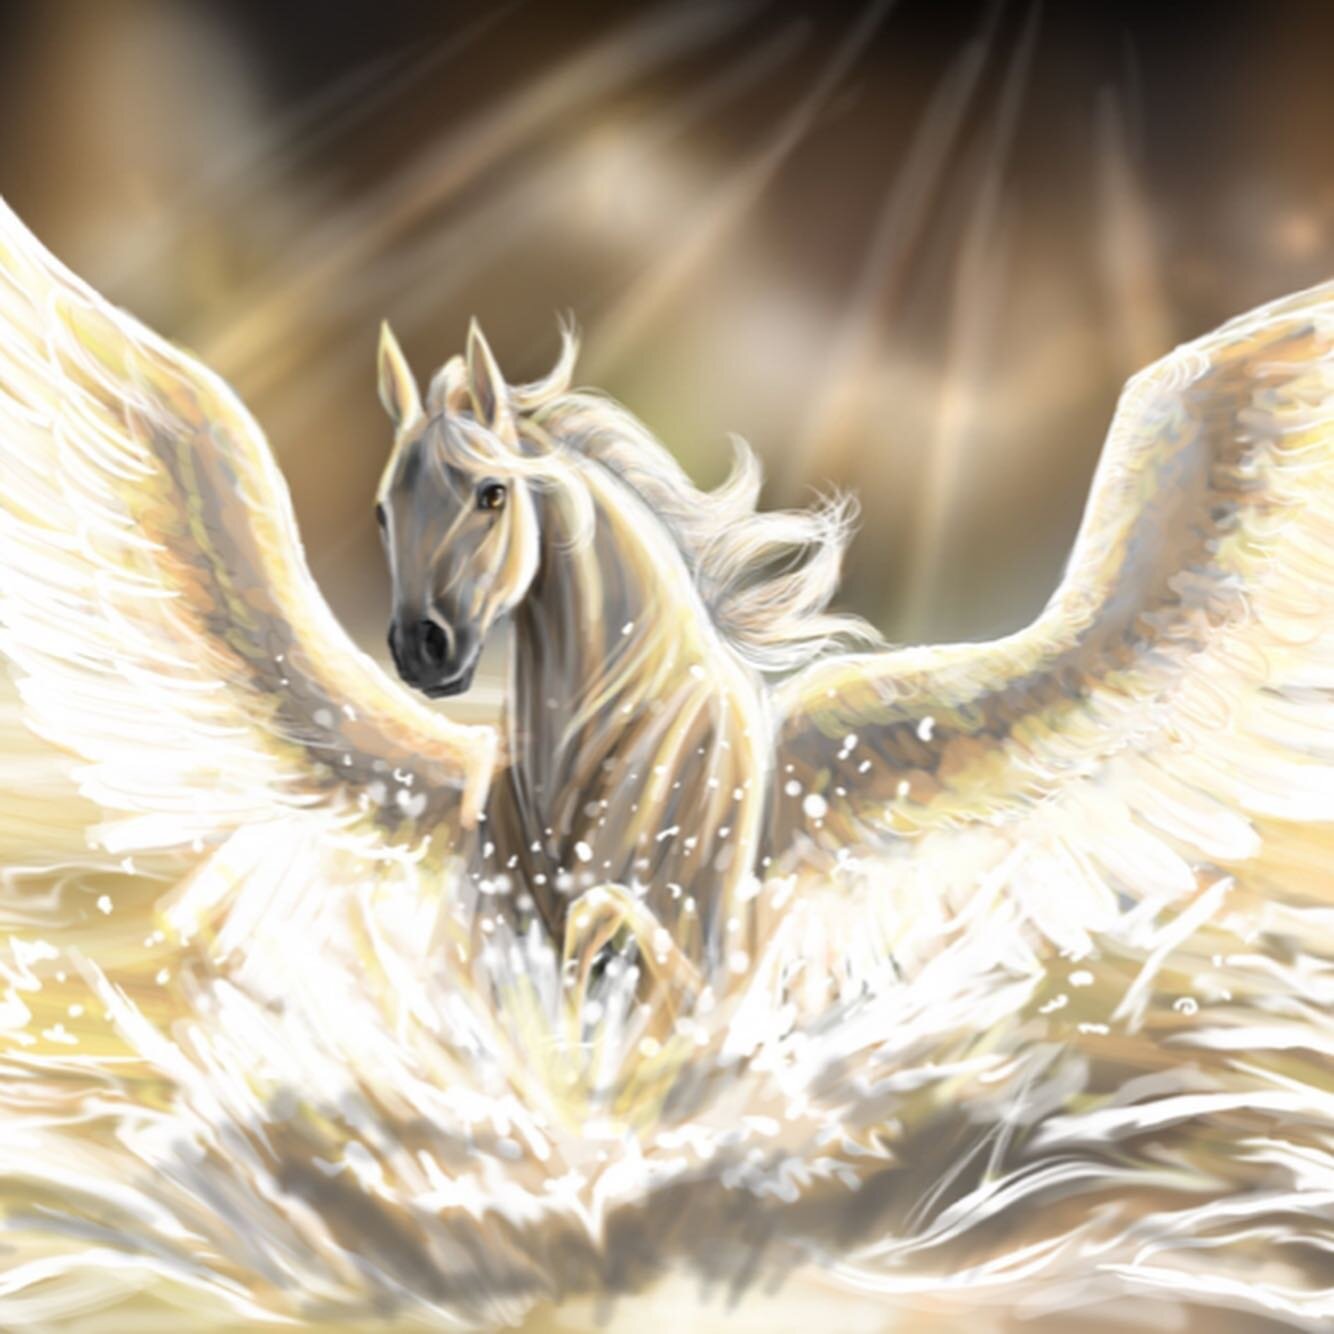 #Pegasus 🐎 
Pegasus was made from the blood of Medusa; Queen of Snakes 🐍 
Pegasus creates a fountain of water 💧 
Pegasus means &lsquo;to pin together/ to-god/aether&rsquo; (Peg-to-Zeus) or &lsquo;beat&rsquo; (Pegasus beats his hoofs against flint/